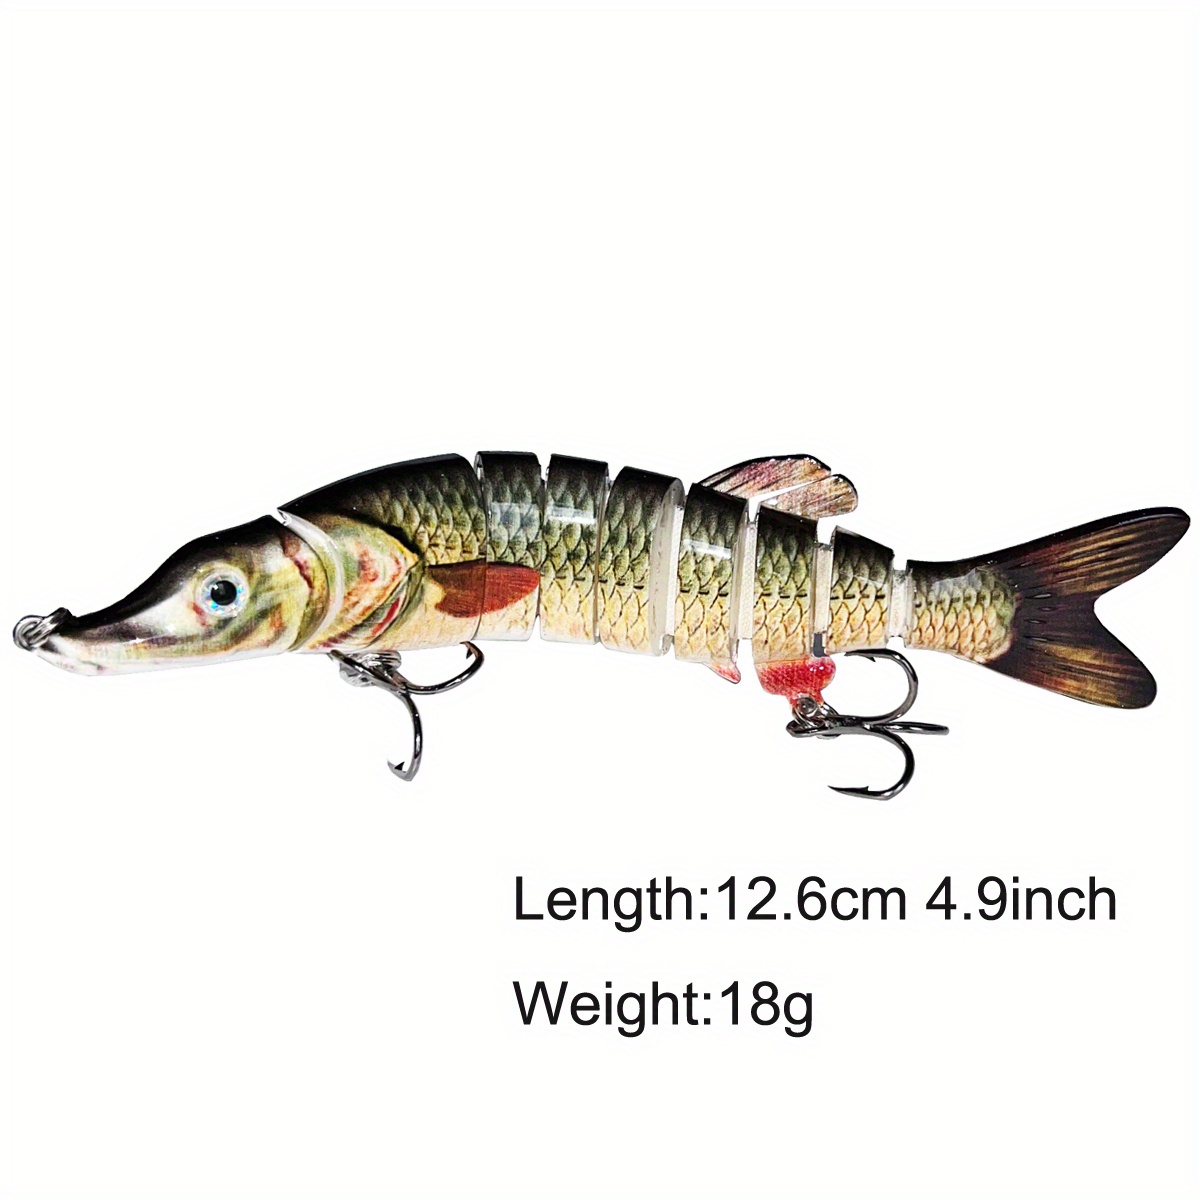 Fishing Lures Jointbait swimbait 178mm Lures for fishing pike